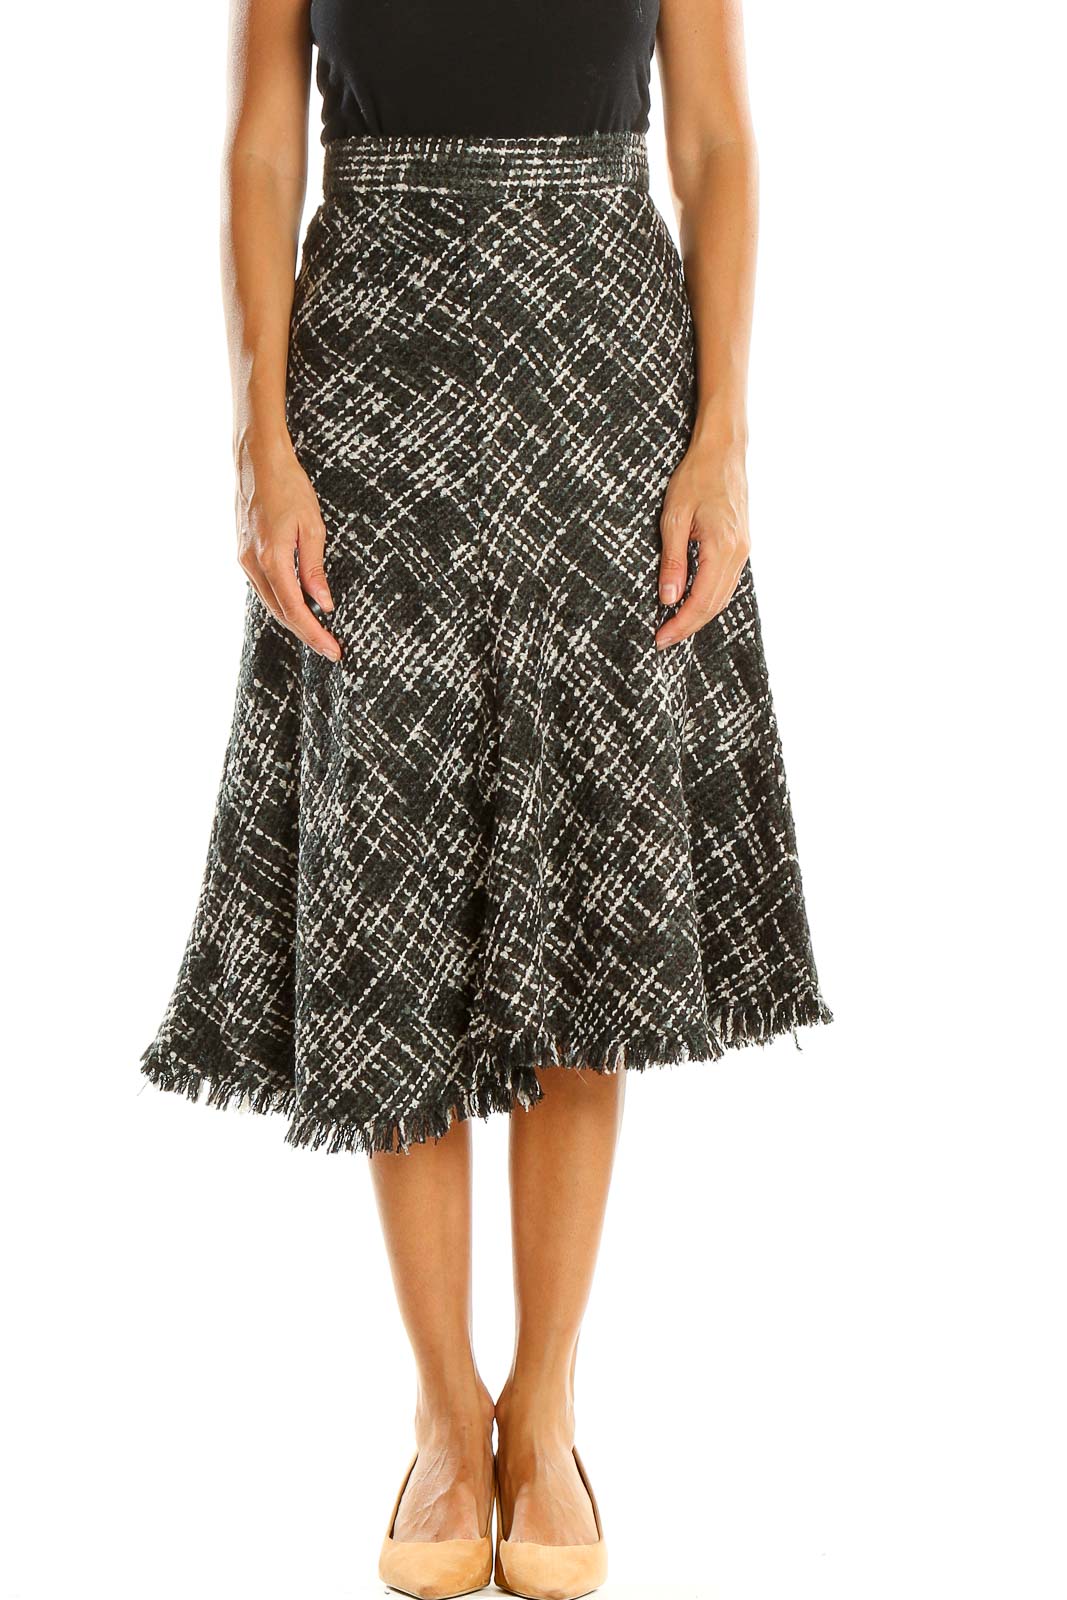 Black Woven Checkered Casual A-Line Skirt Front